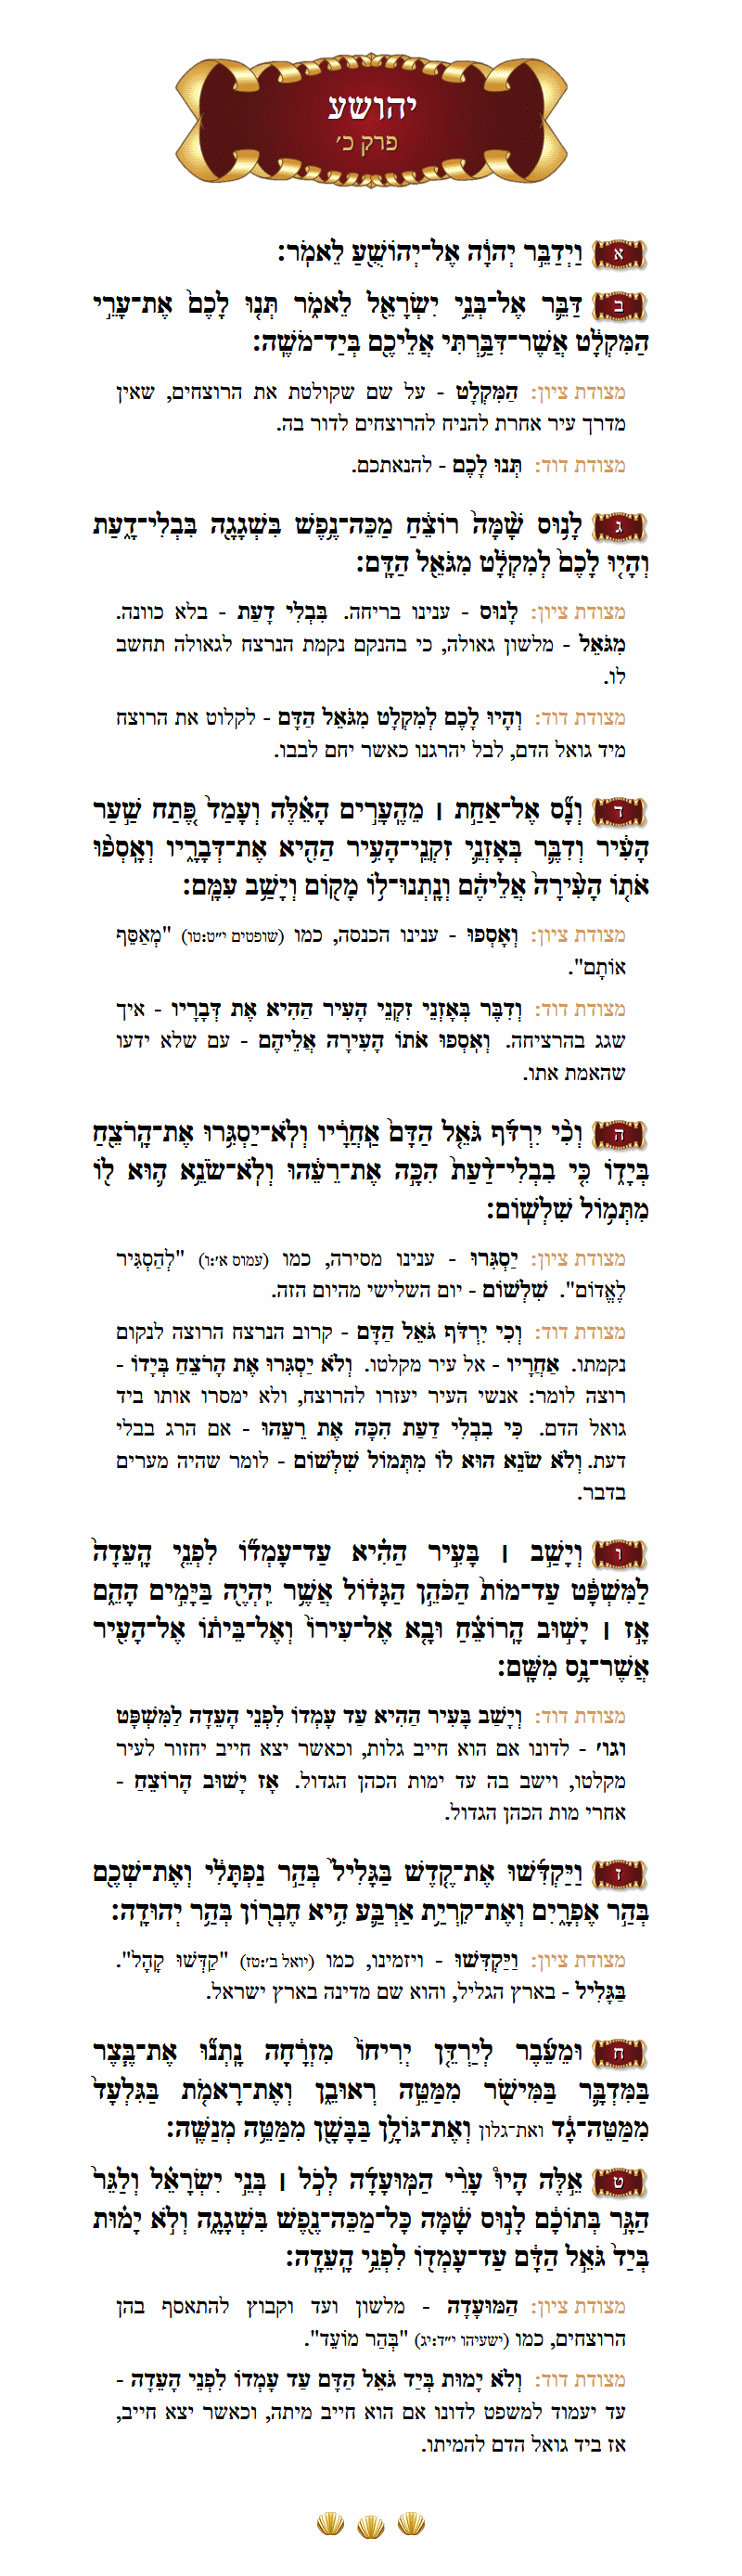 Sefer Yehoshua Chapter 20 with commentary